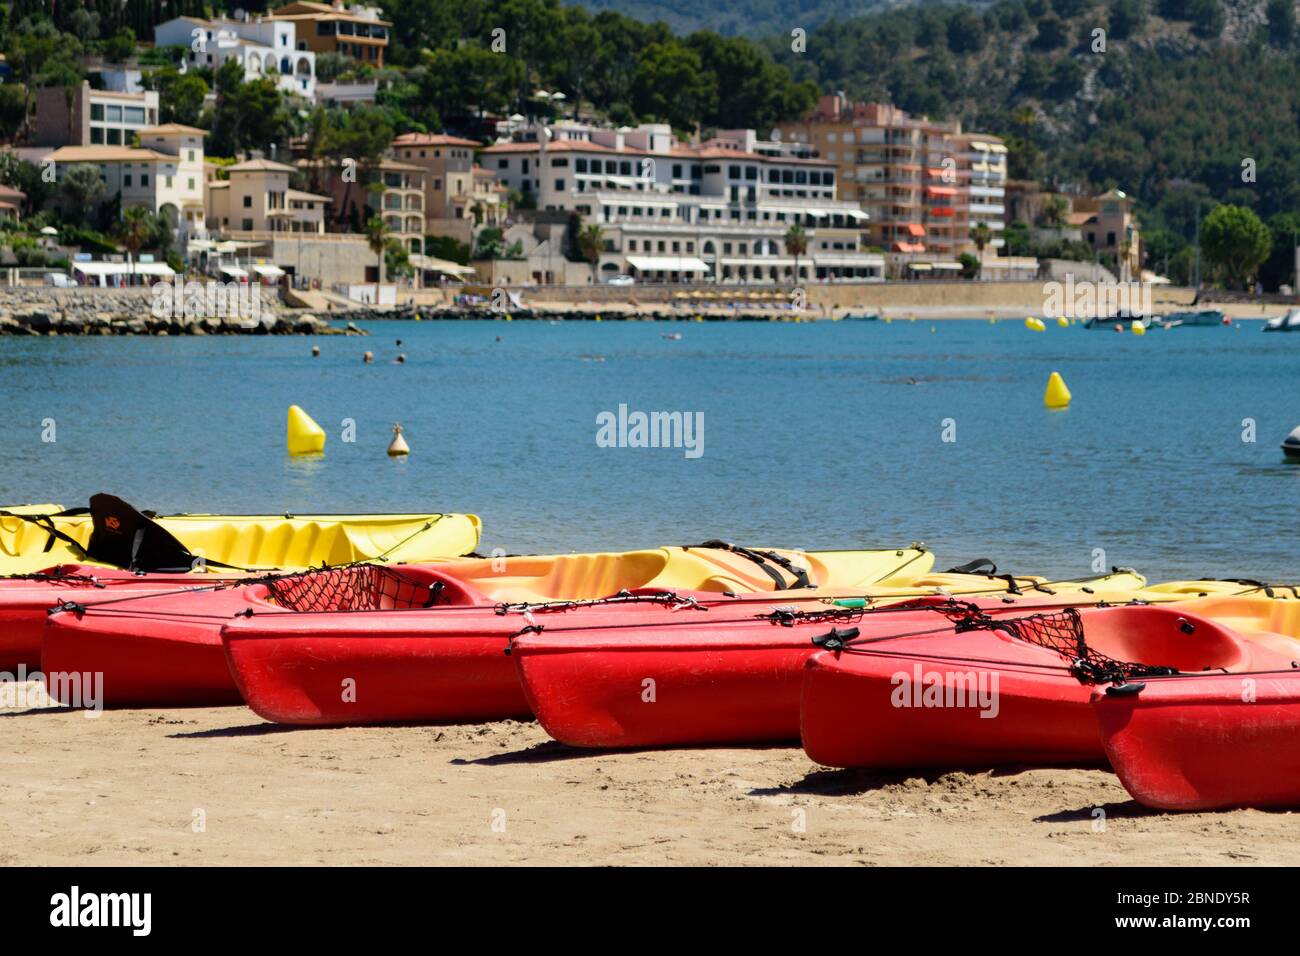 Red kayaks lined up on the beach in Port de Soller, Majorca, ready to be taken out by adventurous visitors Stock Photo